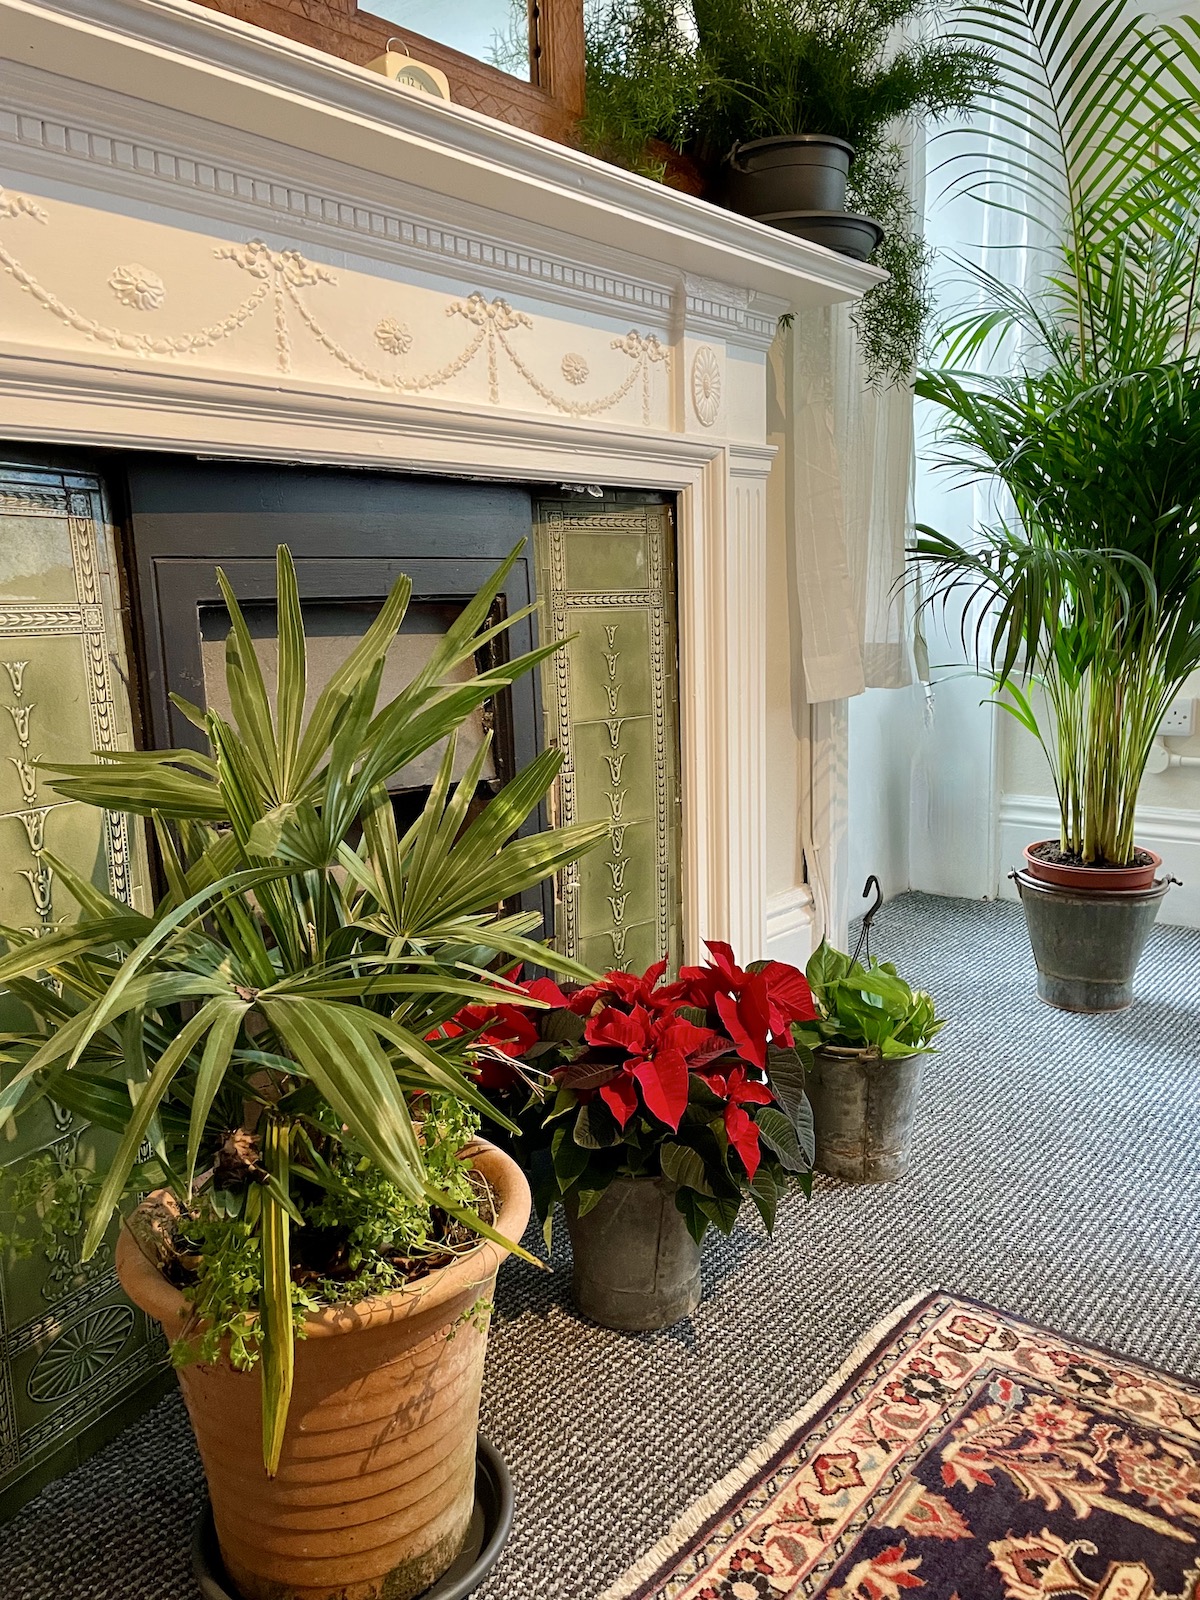 Ornate green fireplace and plants